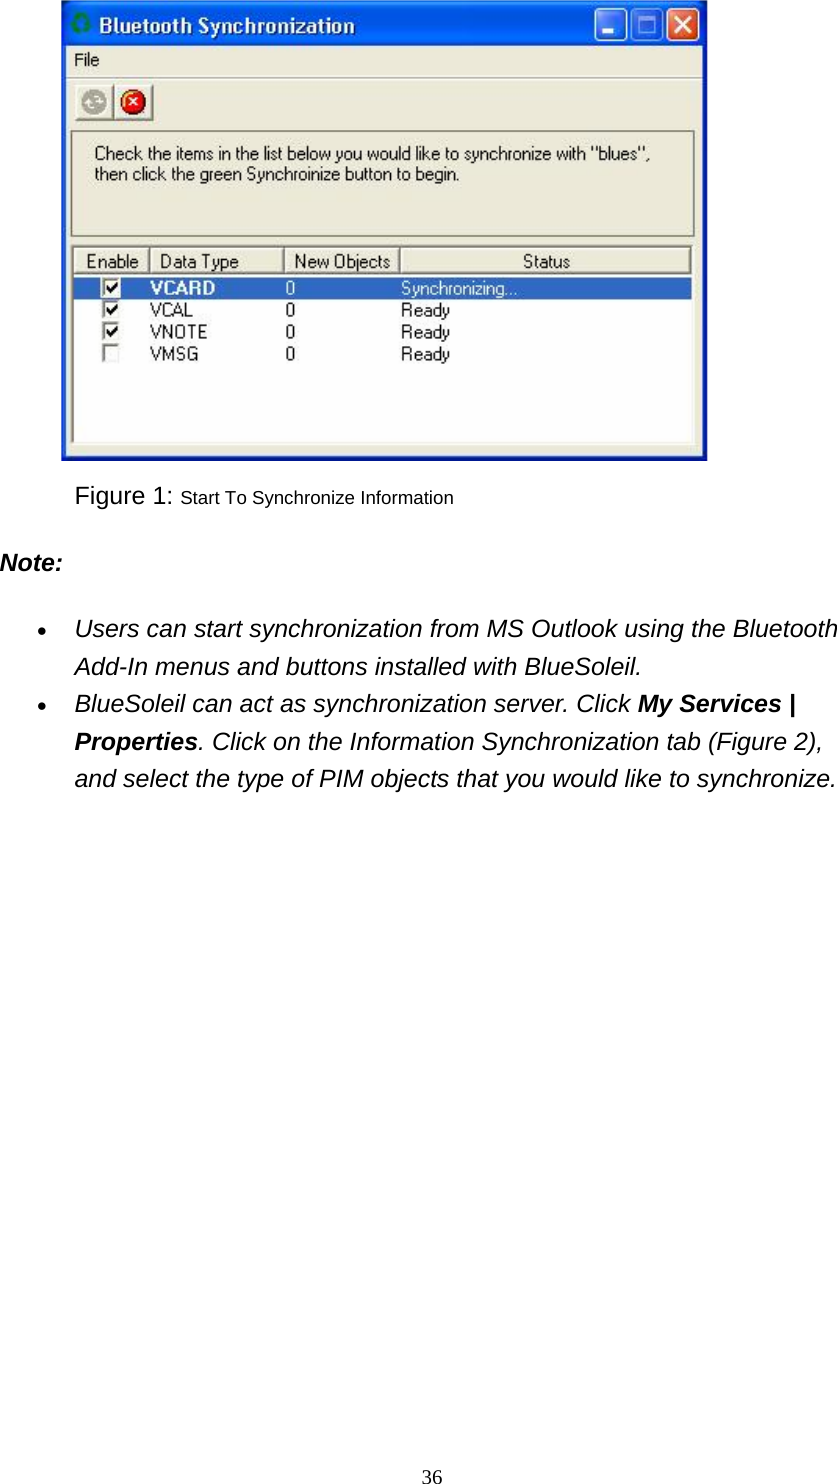   36                     Figure 1: Start To Synchronize Information Note: • Users can start synchronization from MS Outlook using the Bluetooth Add-In menus and buttons installed with BlueSoleil.   • BlueSoleil can act as synchronization server. Click My Services | Properties. Click on the Information Synchronization tab (Figure 2), and select the type of PIM objects that you would like to synchronize.   